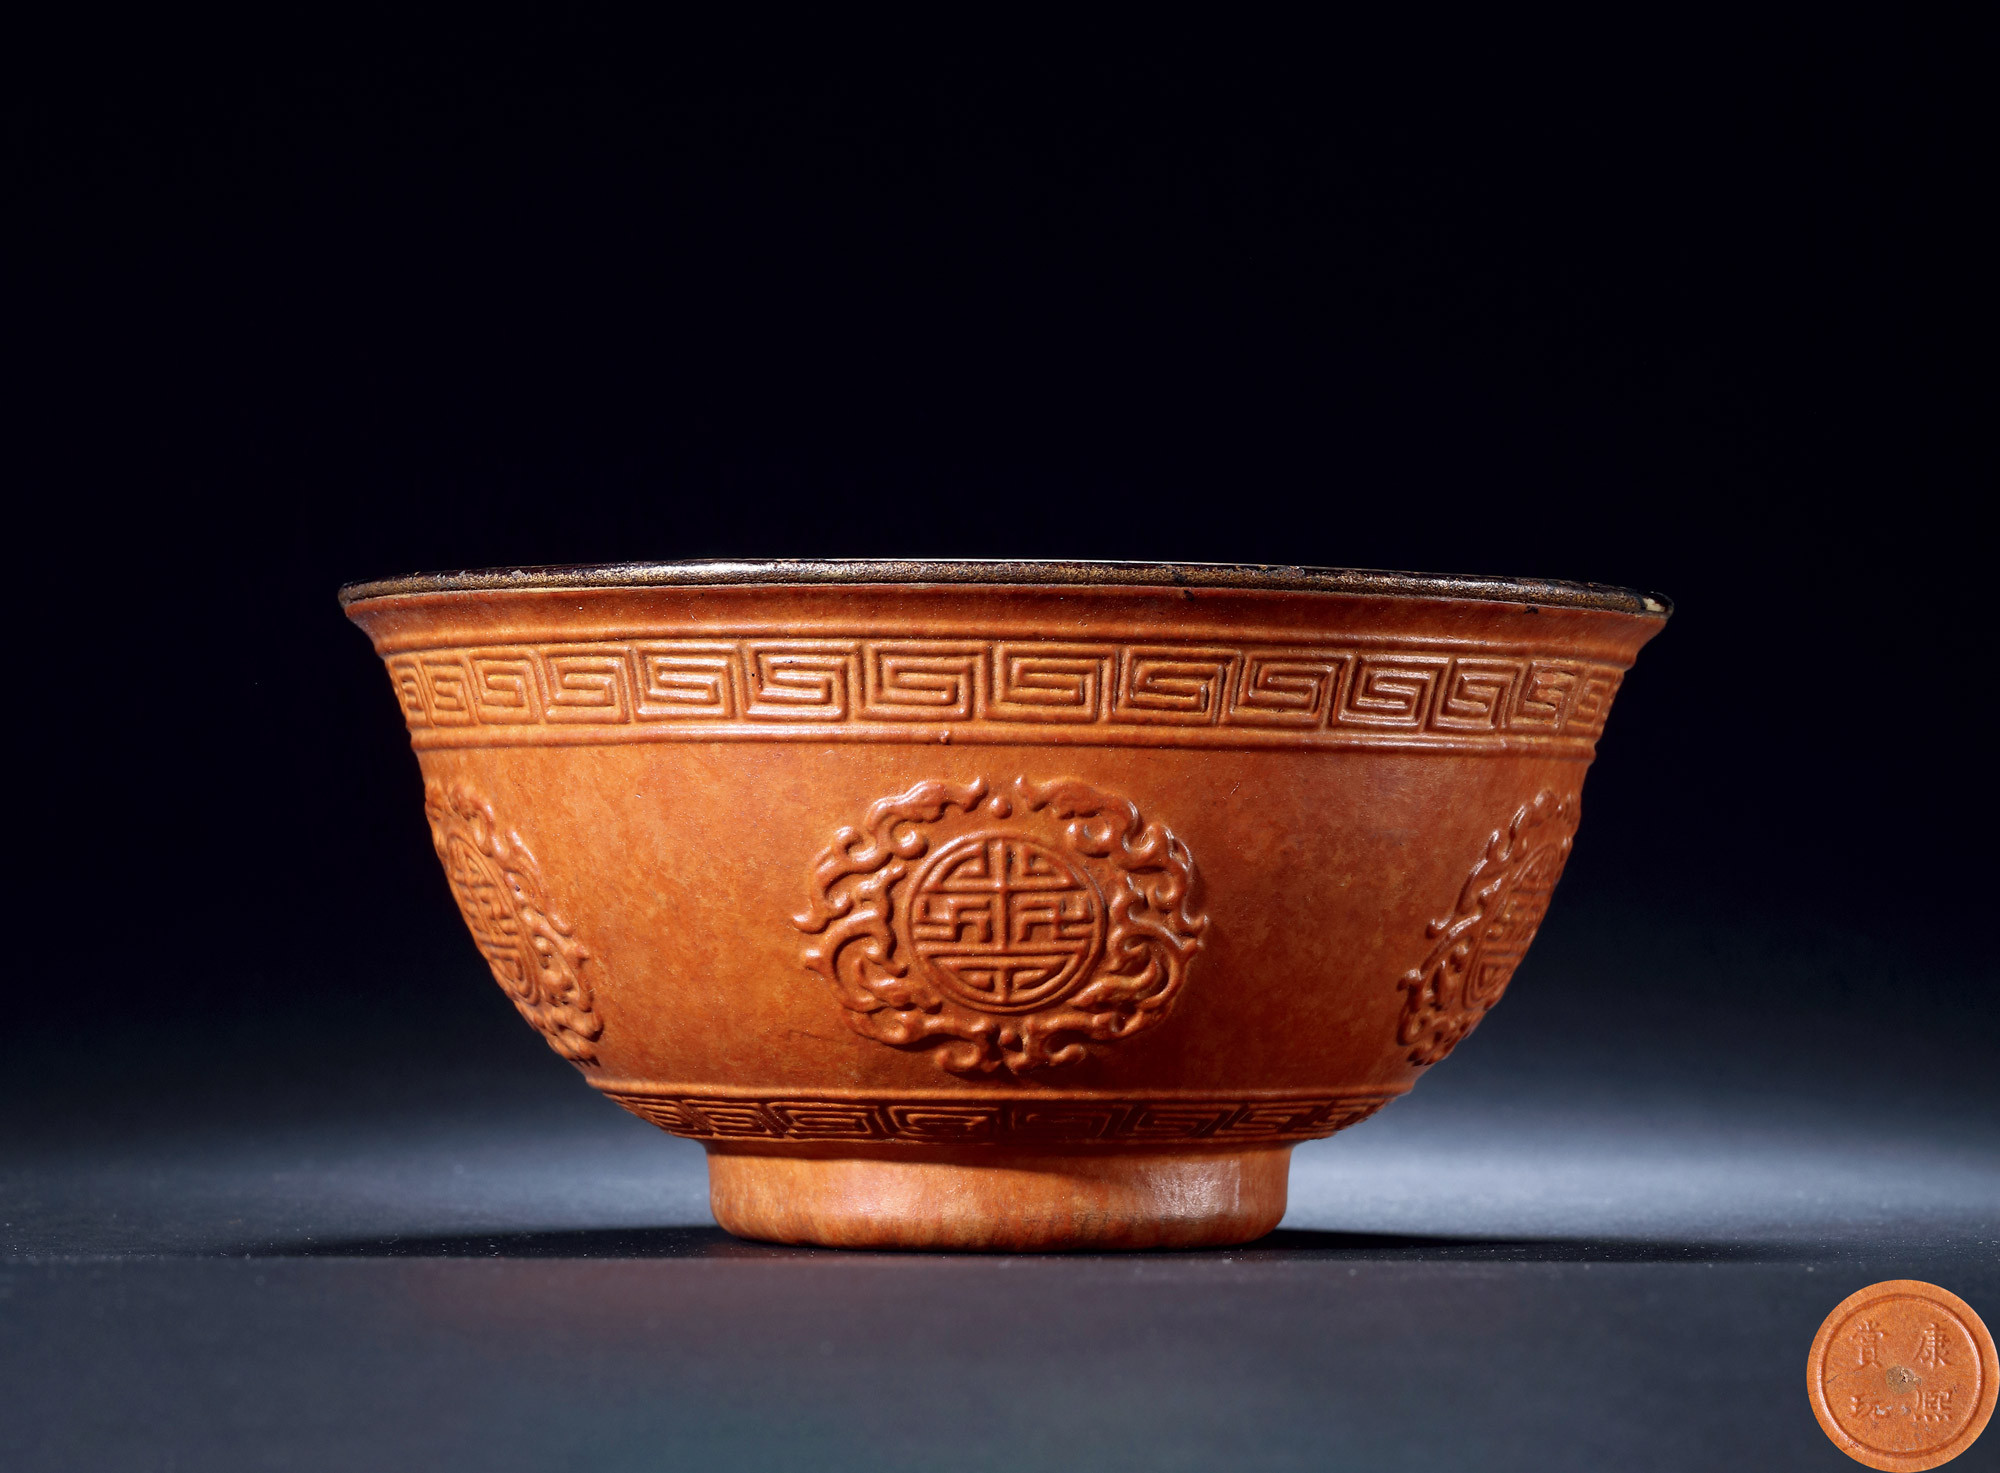 A VERY RARE AND FINELY HULU MOULDED BOWL